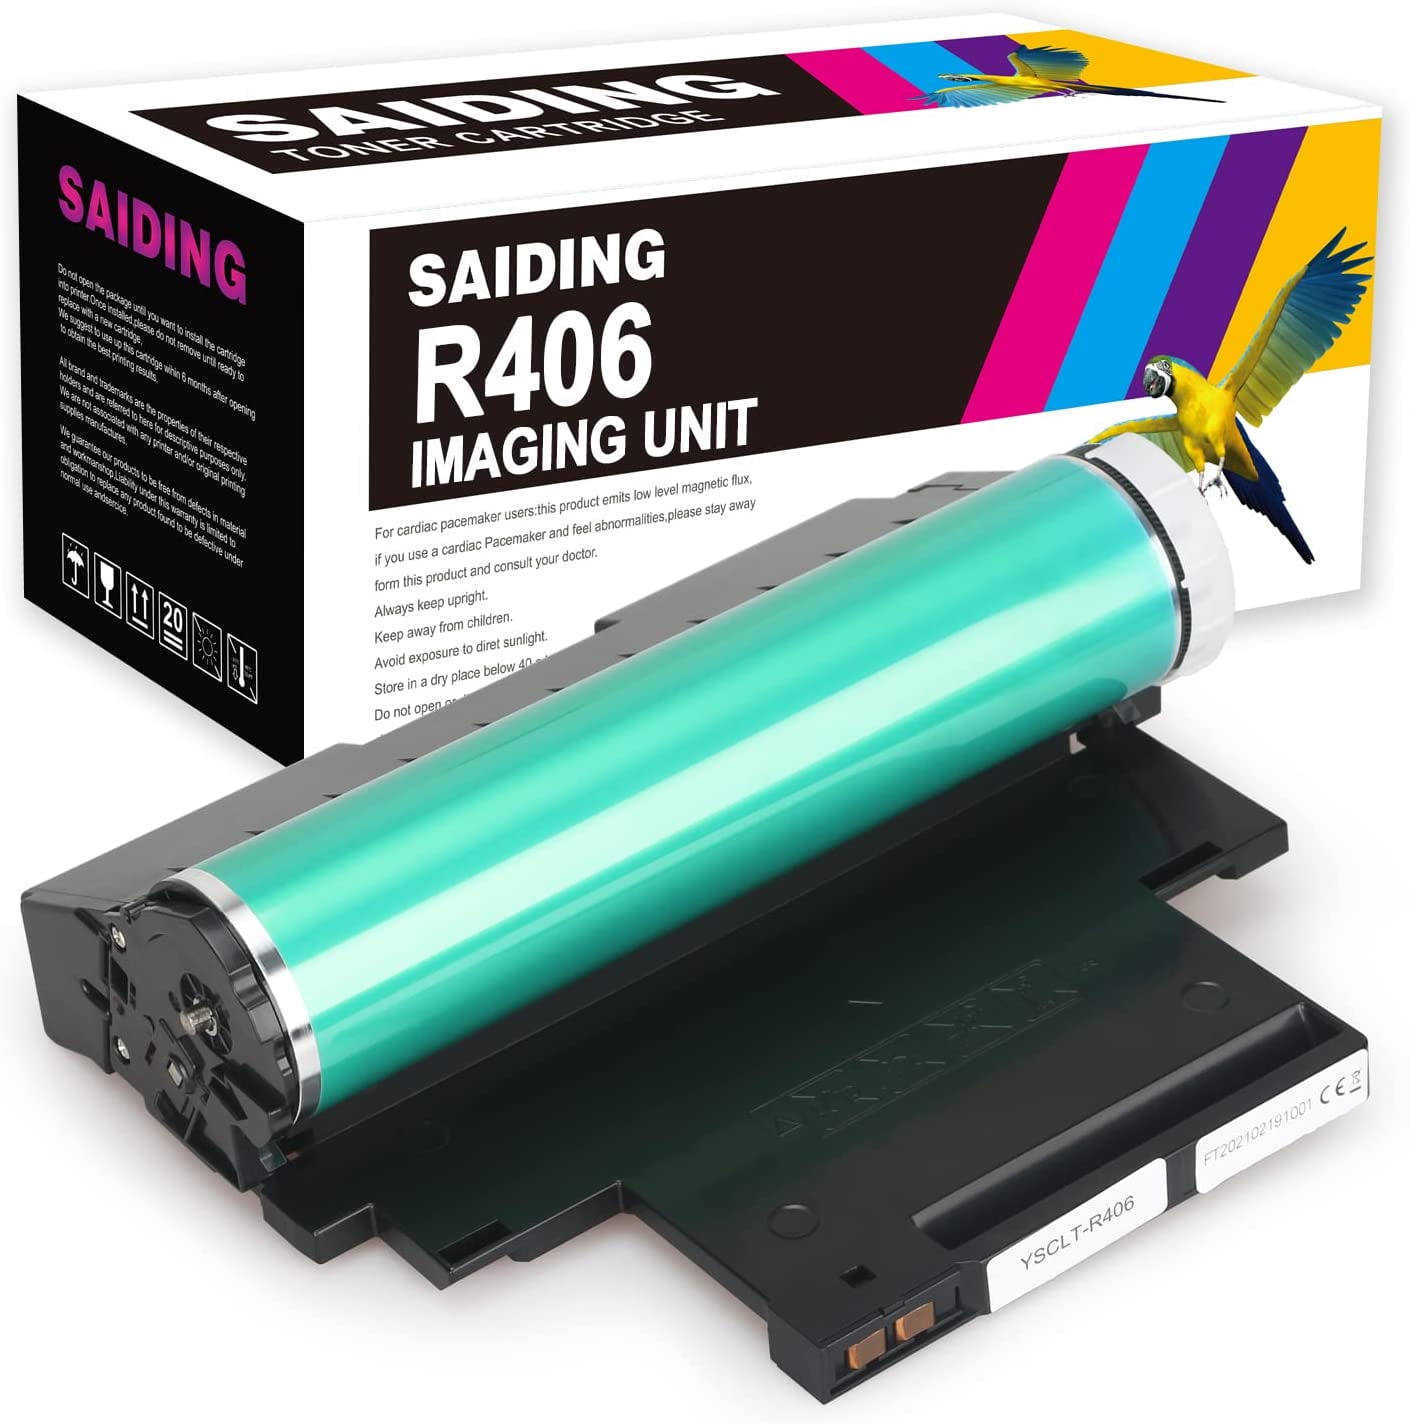 R406 Imaging Unit Replacement for Samsung CLT-R406 R406 Drum Cartridge to Use with Xpress C410W C430W C460FW CLP-365W CLX-3305FW (1 Pack) - Walmart.com